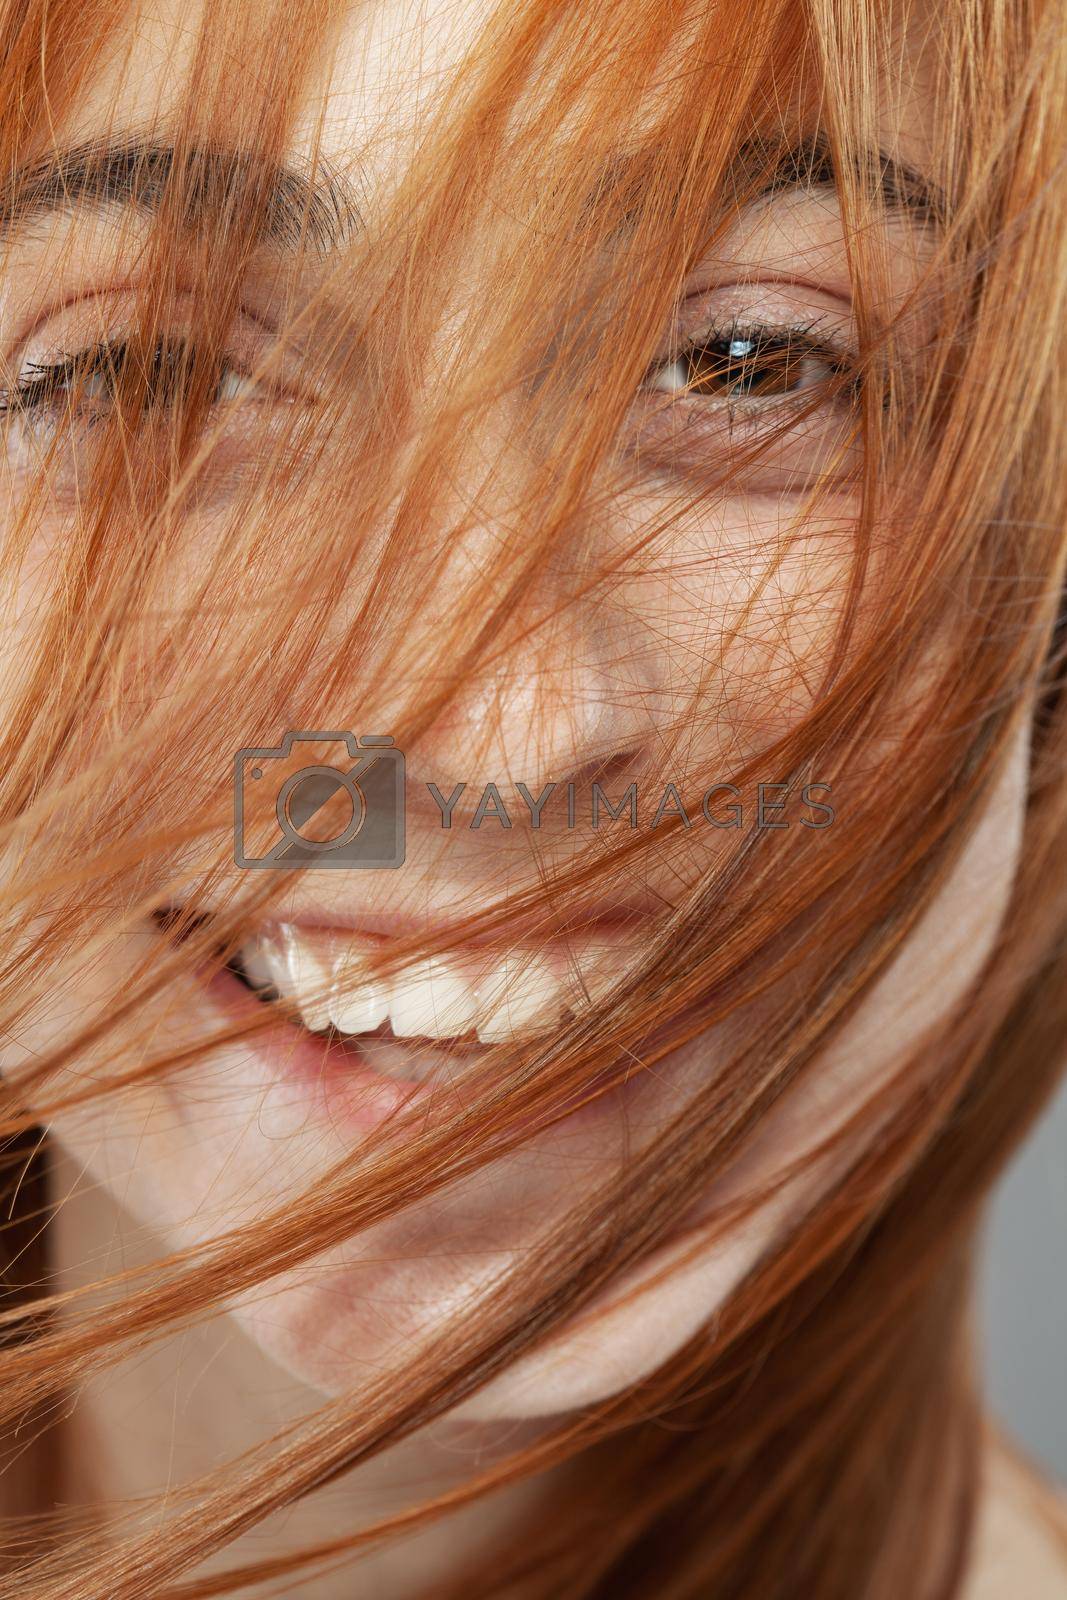 Royalty free image of Beautiful dark burnt orange windy hair girl smiling. Studio portrait with happy face expression against gray background... by kokimk